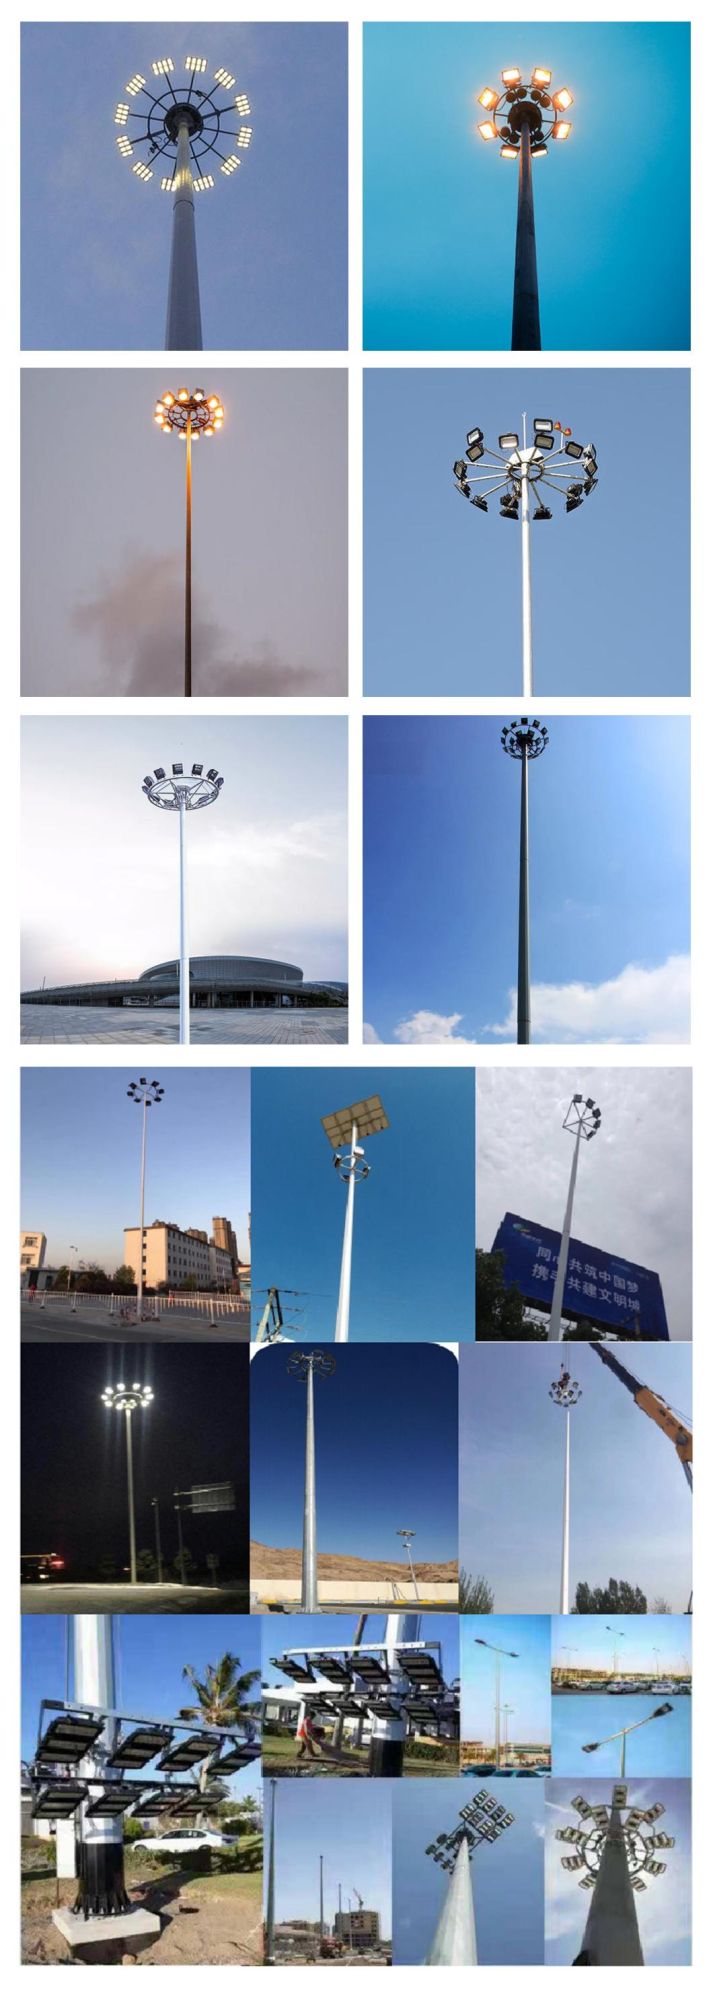 15m 20m 25m 30m 300W 400W 500W 1000W 1500W Waterproof Outdoor LED Flood High Mast Lighting with Pole for Airport Sports Stadium Lifting System